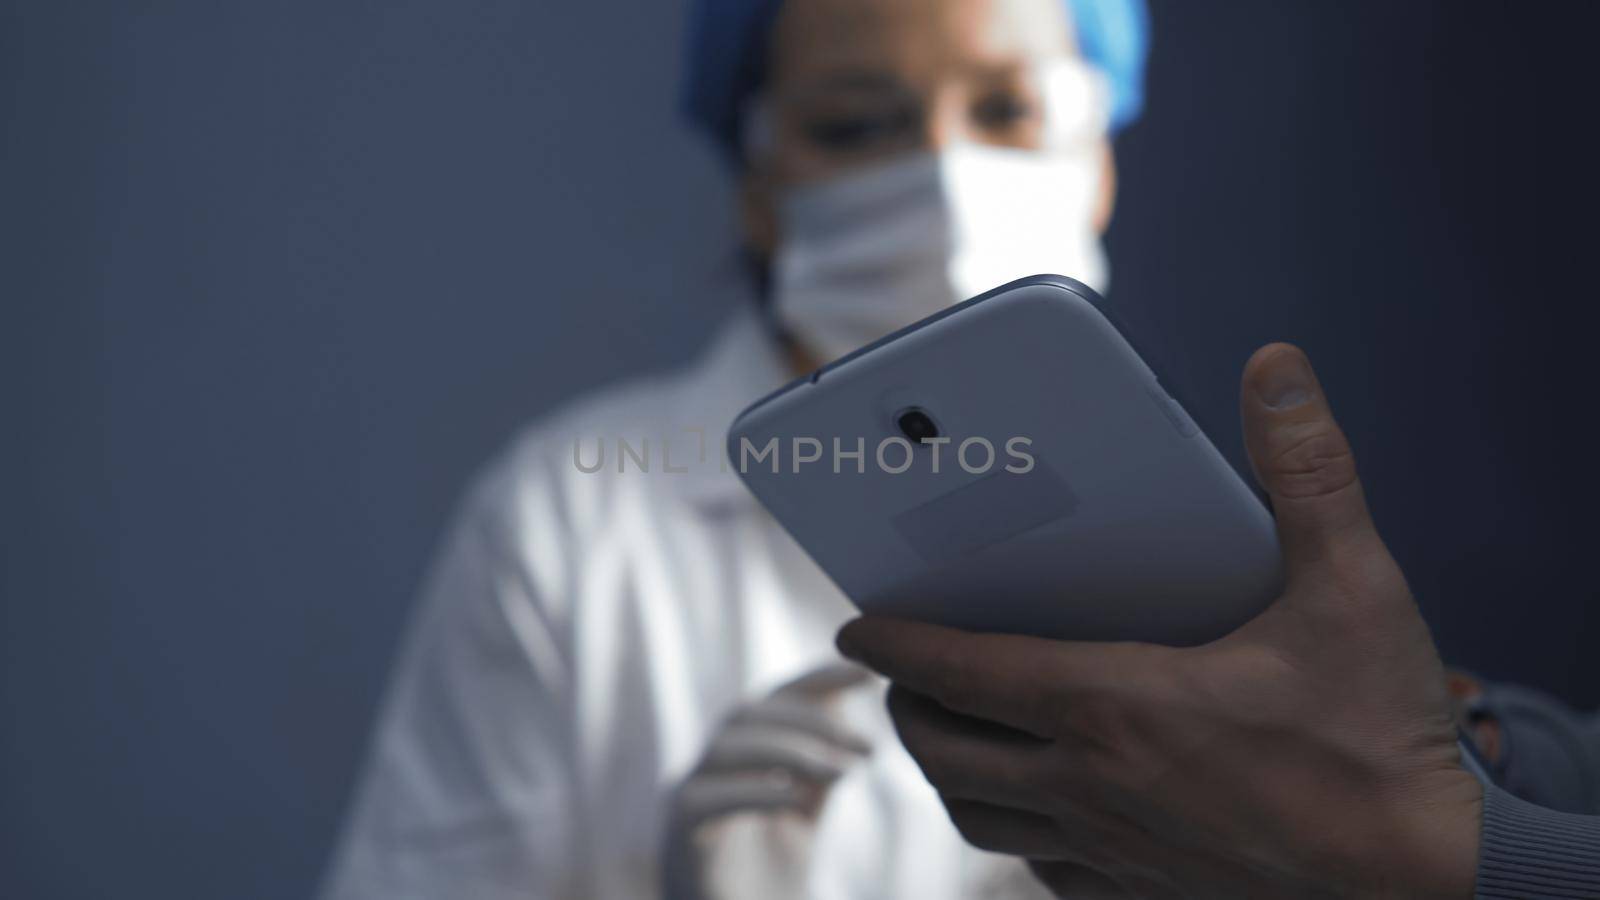 Female doctor or nurse learning to use an electronic notepad gadget. Focus on electronic device in male hands in the foreground. Education concept. Close up shot. Toned image by LipikStockMedia